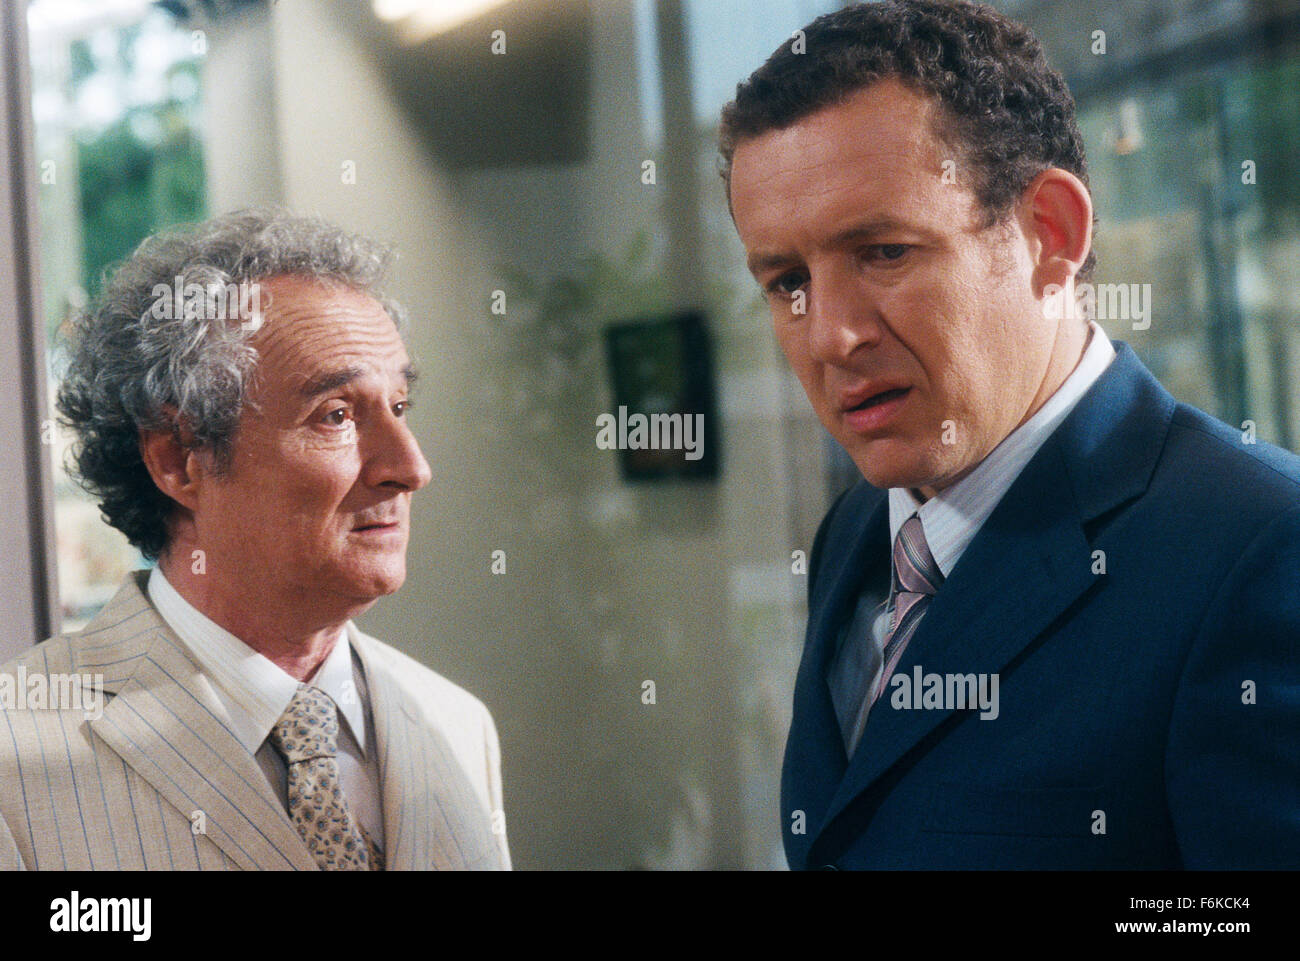 RELEASE DATE: June 07, 2006. MOVIE TITLE: La Maison Du Bonheur. STUDIO: Pathe Renn Productions. PLOT: On a mission to loosen up, a miser's sets about buying a house in the country for his family. PICTURED: DANIEL PREVOST as Jean-Pierre Draquart and DANY BOON as Charles Boulin. Stock Photo